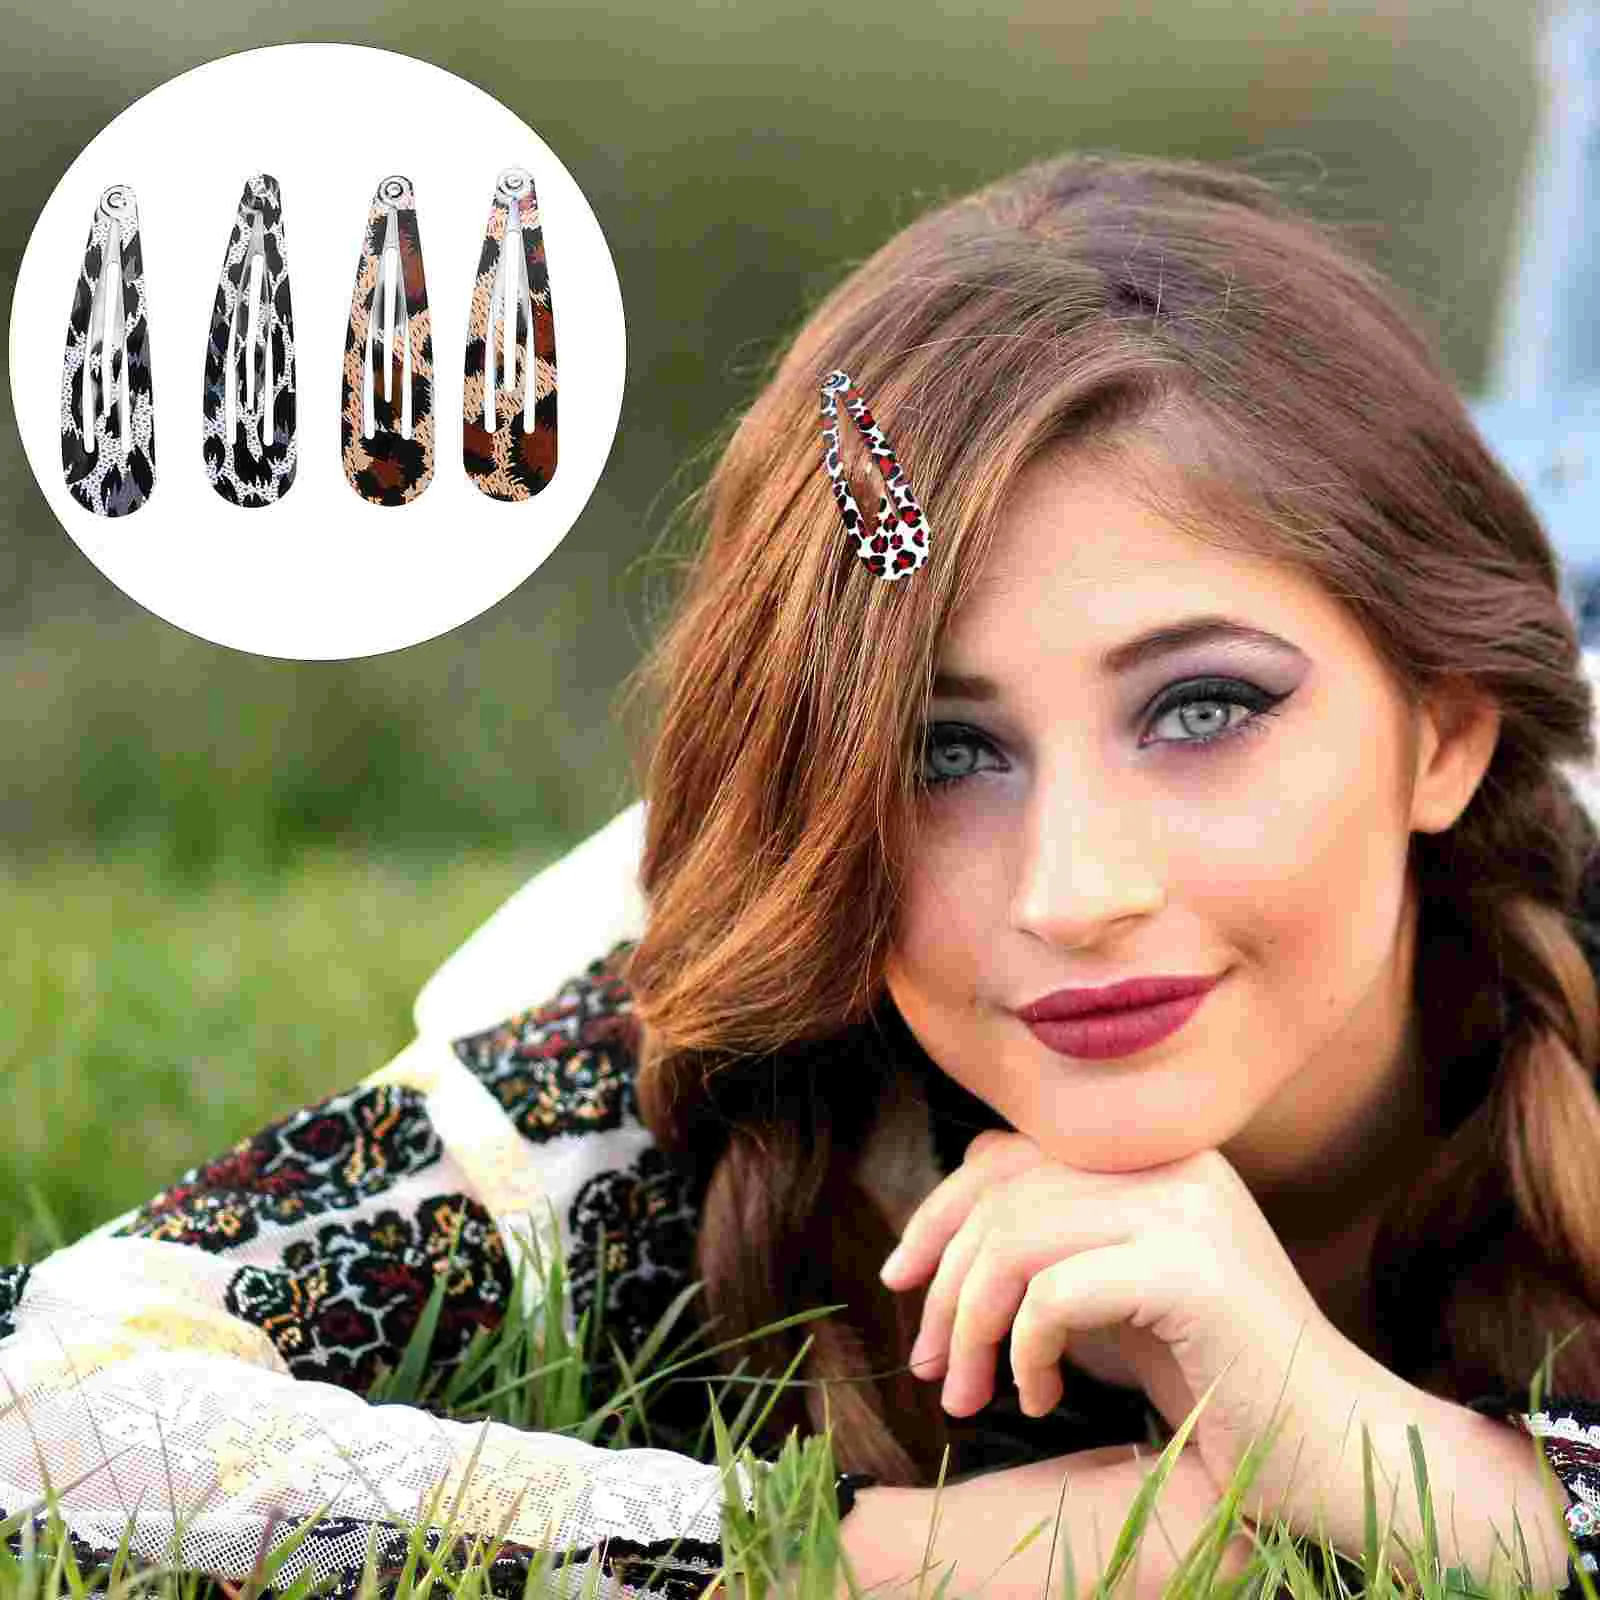 

24 Pcs Hairpin BB Clips Accessories Girls Leopard Snap Metal Snaps Hairgrips Women Barrettes